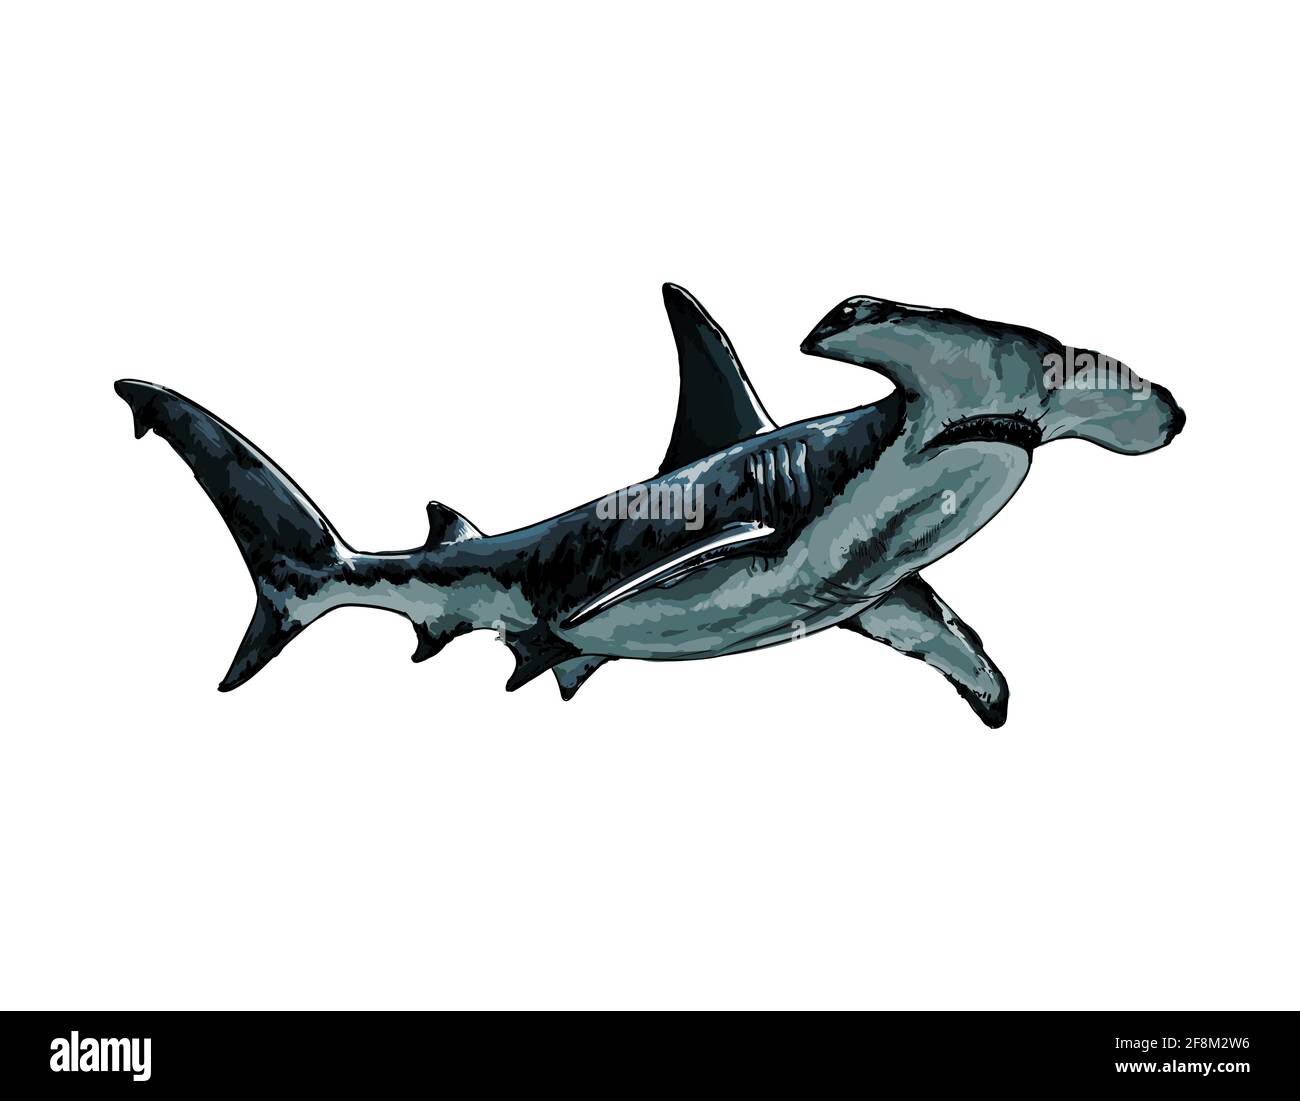 https://c8.alamy.com/comp/2F8M2W6/hammerhead-shark-from-a-splash-of-watercolor-colored-drawing-realistic-vector-illustration-of-paints-2F8M2W6.jpg